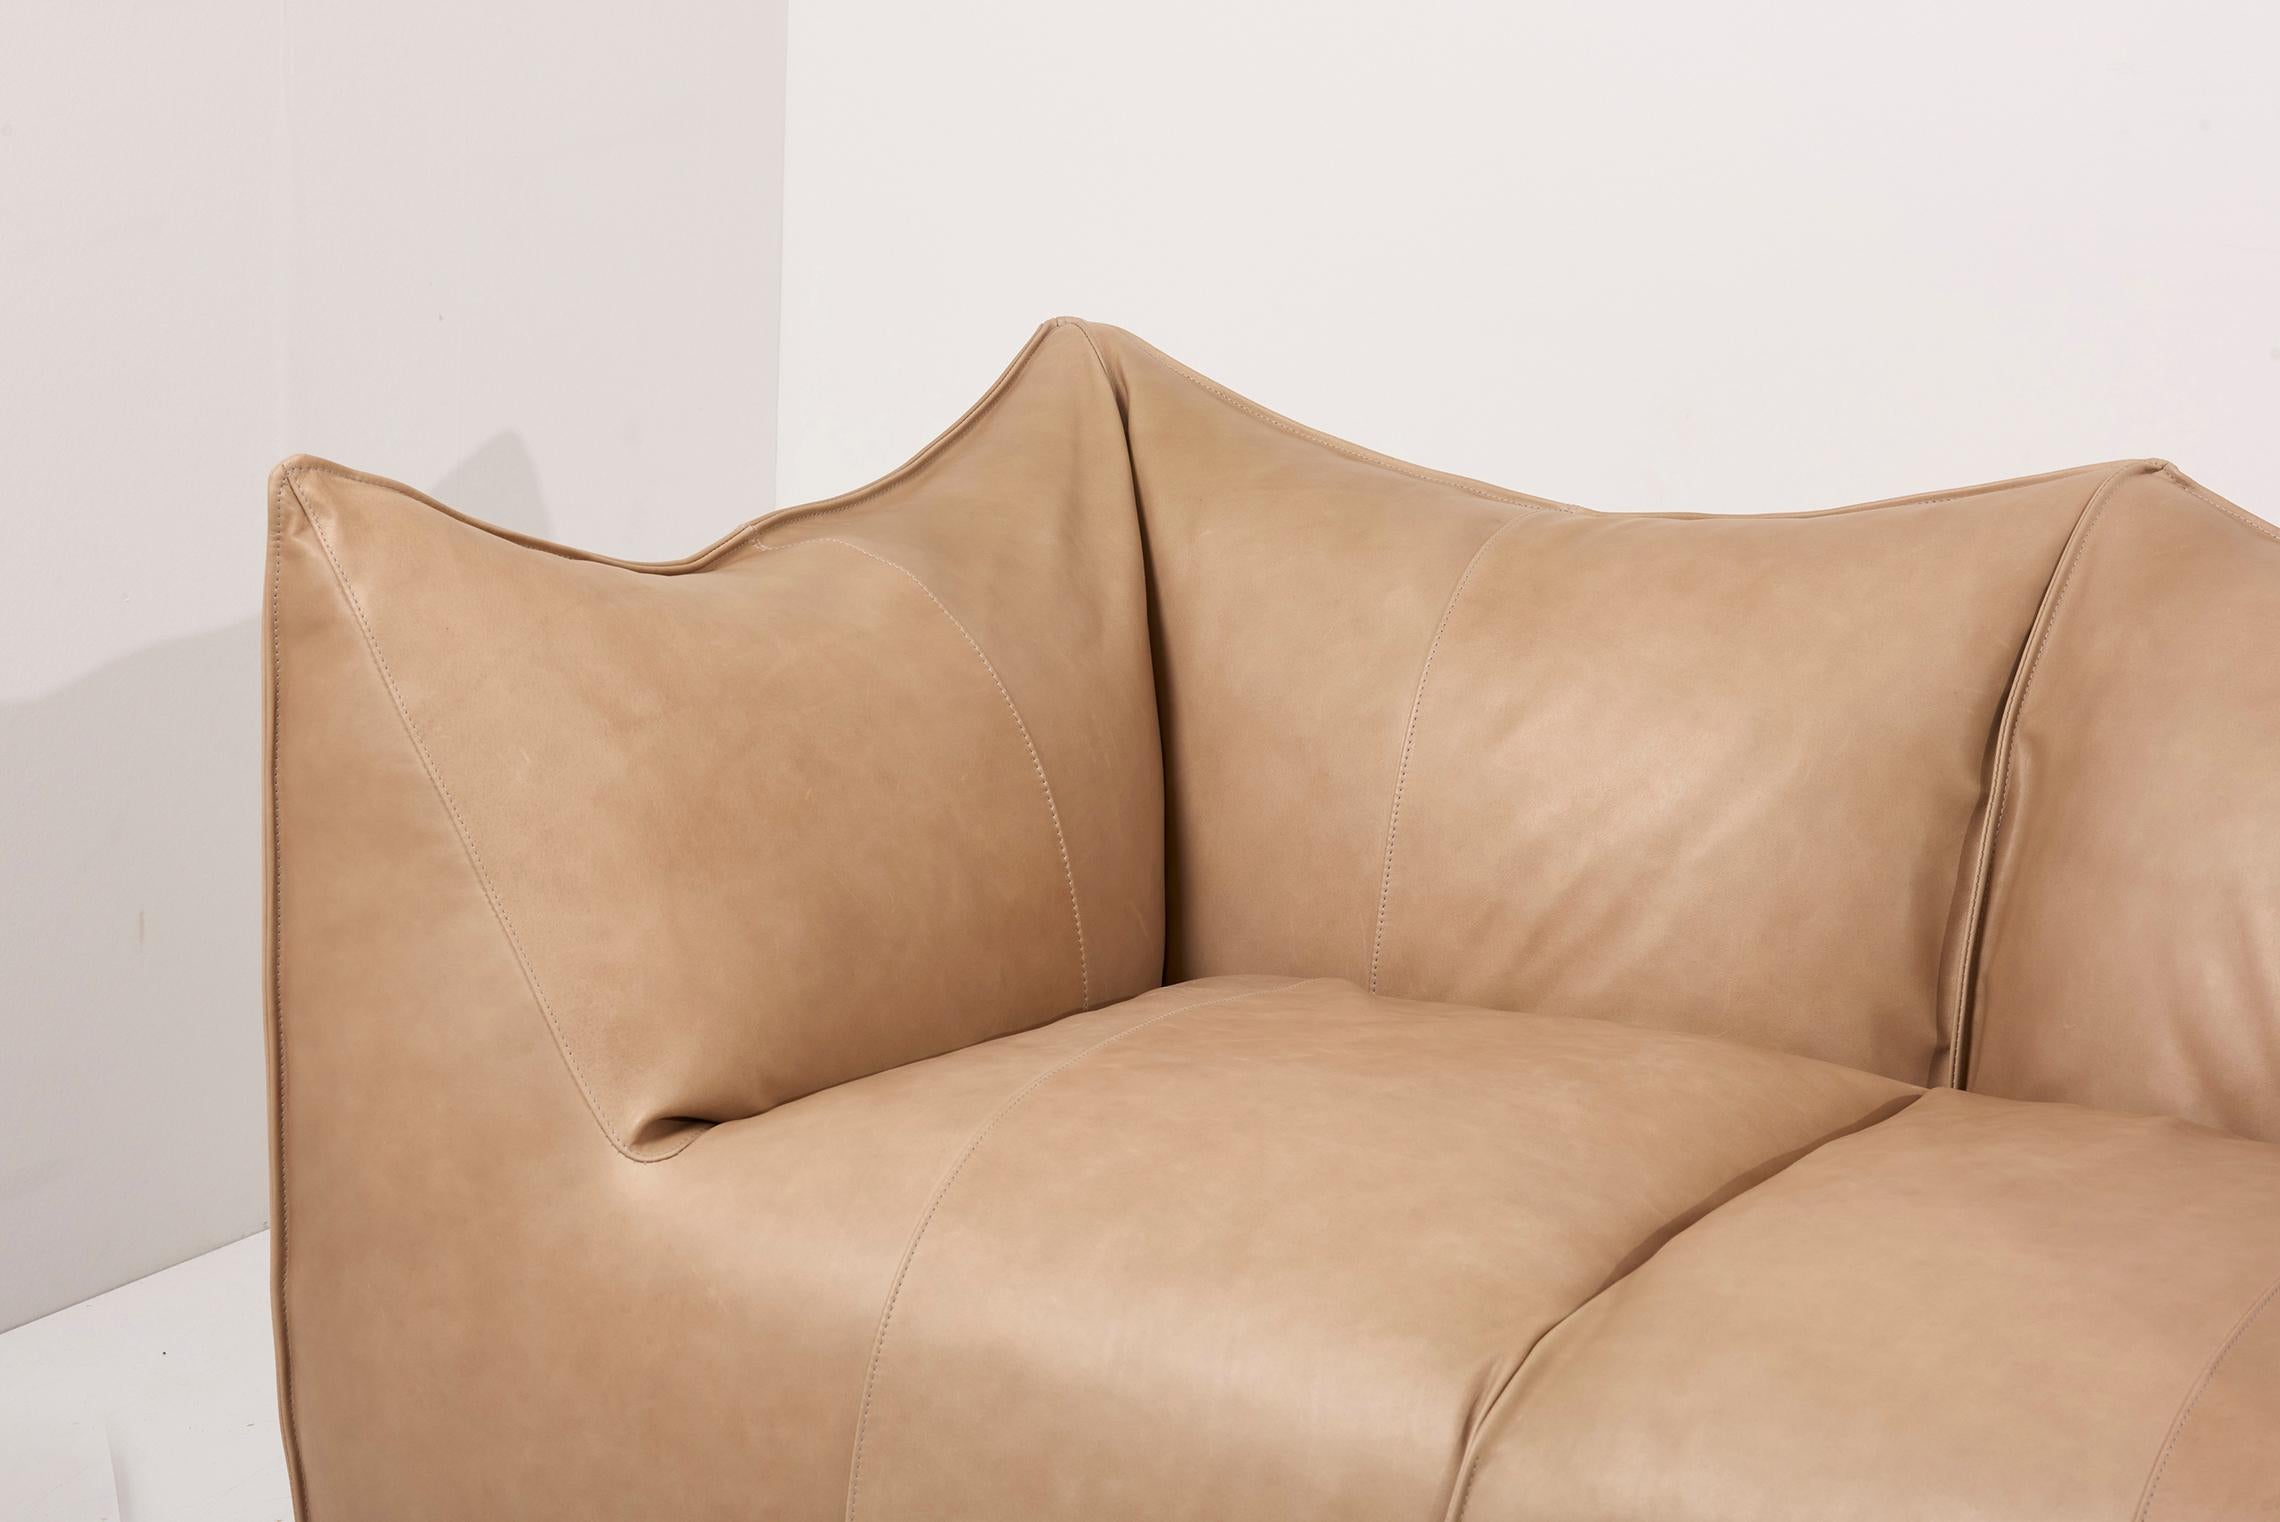 'Le Bambole' 2-seat sofa, designed in 1970s by Mario Bellini and manufactured by B&B Italia in Italy in mud brown aniline leather.